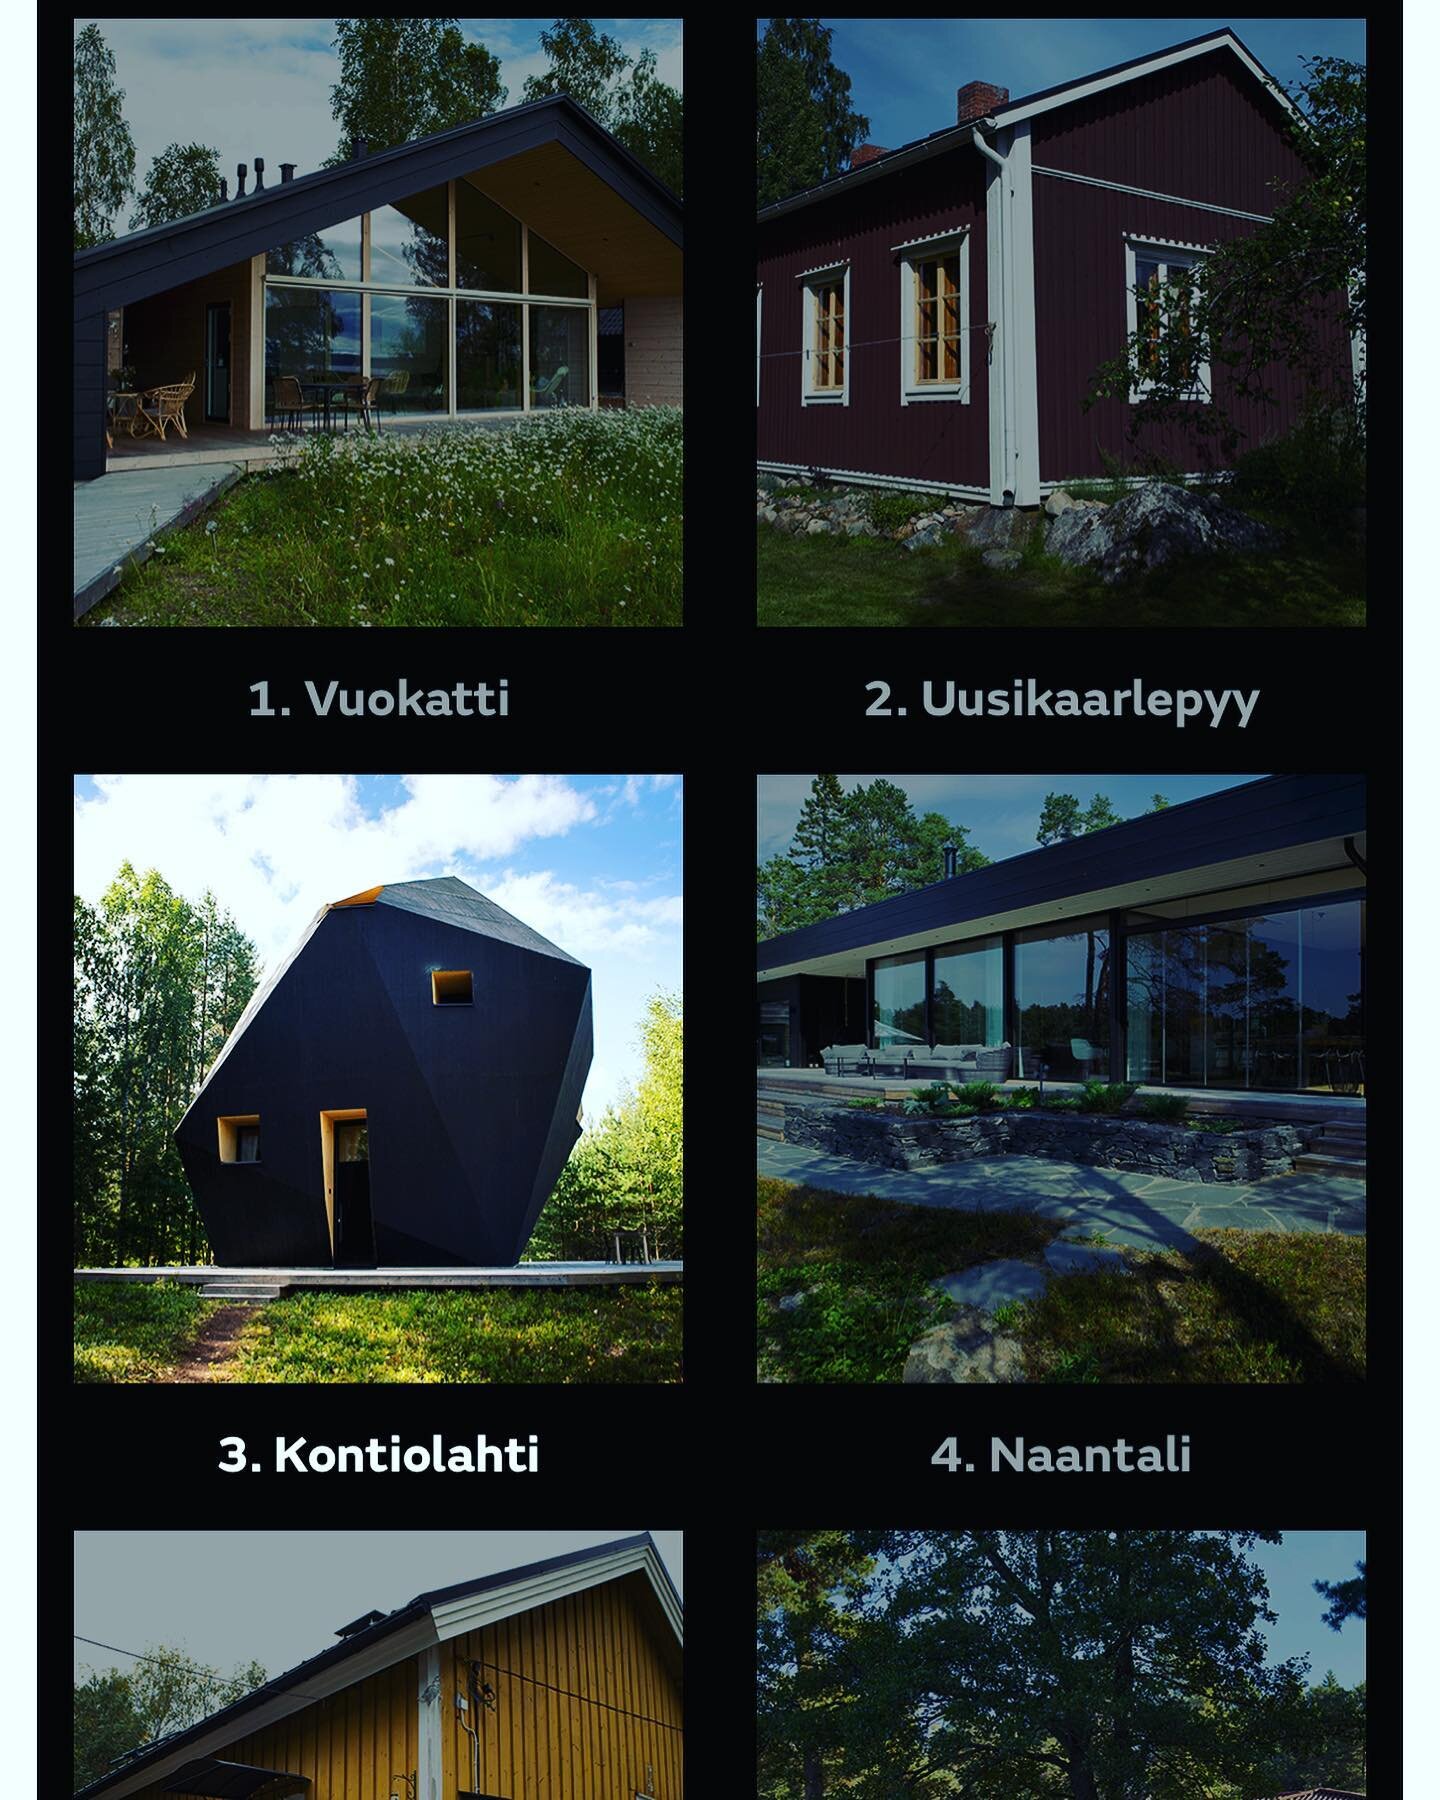 Today 9pm ends voting for &rdquo;the most beautiful cottage in Finland&rdquo; and Meteorite house is a finalist, number 3! You can send your vote via this link: https://www.mtvuutiset.fi/artikkeli/suomen-kaunein-koti-aanestys-on-kaynnissa-mika-kohtei